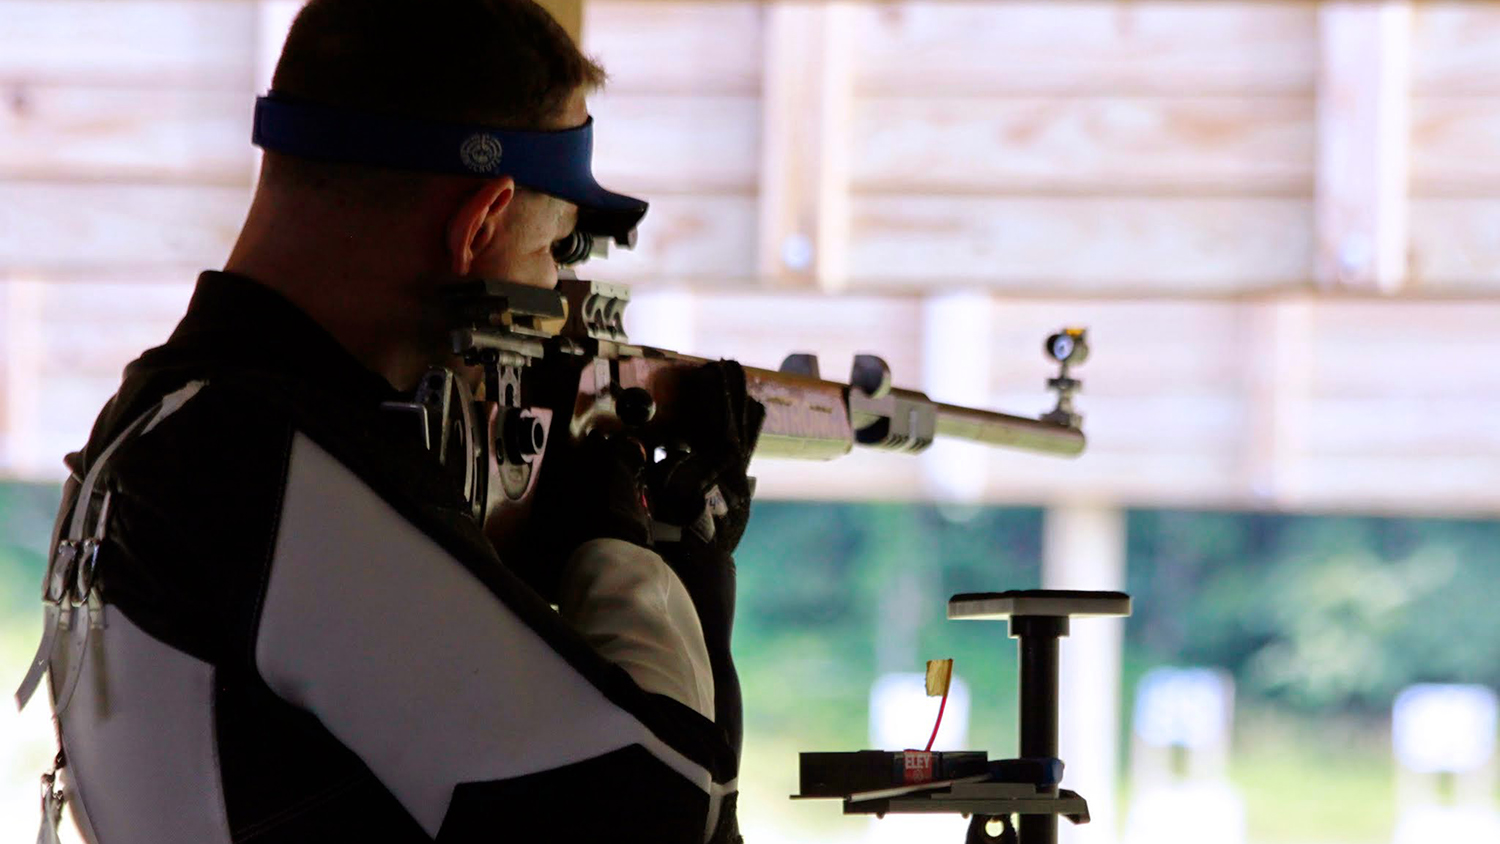 NRA Smallbore Rifle Championships Staying in Indiana